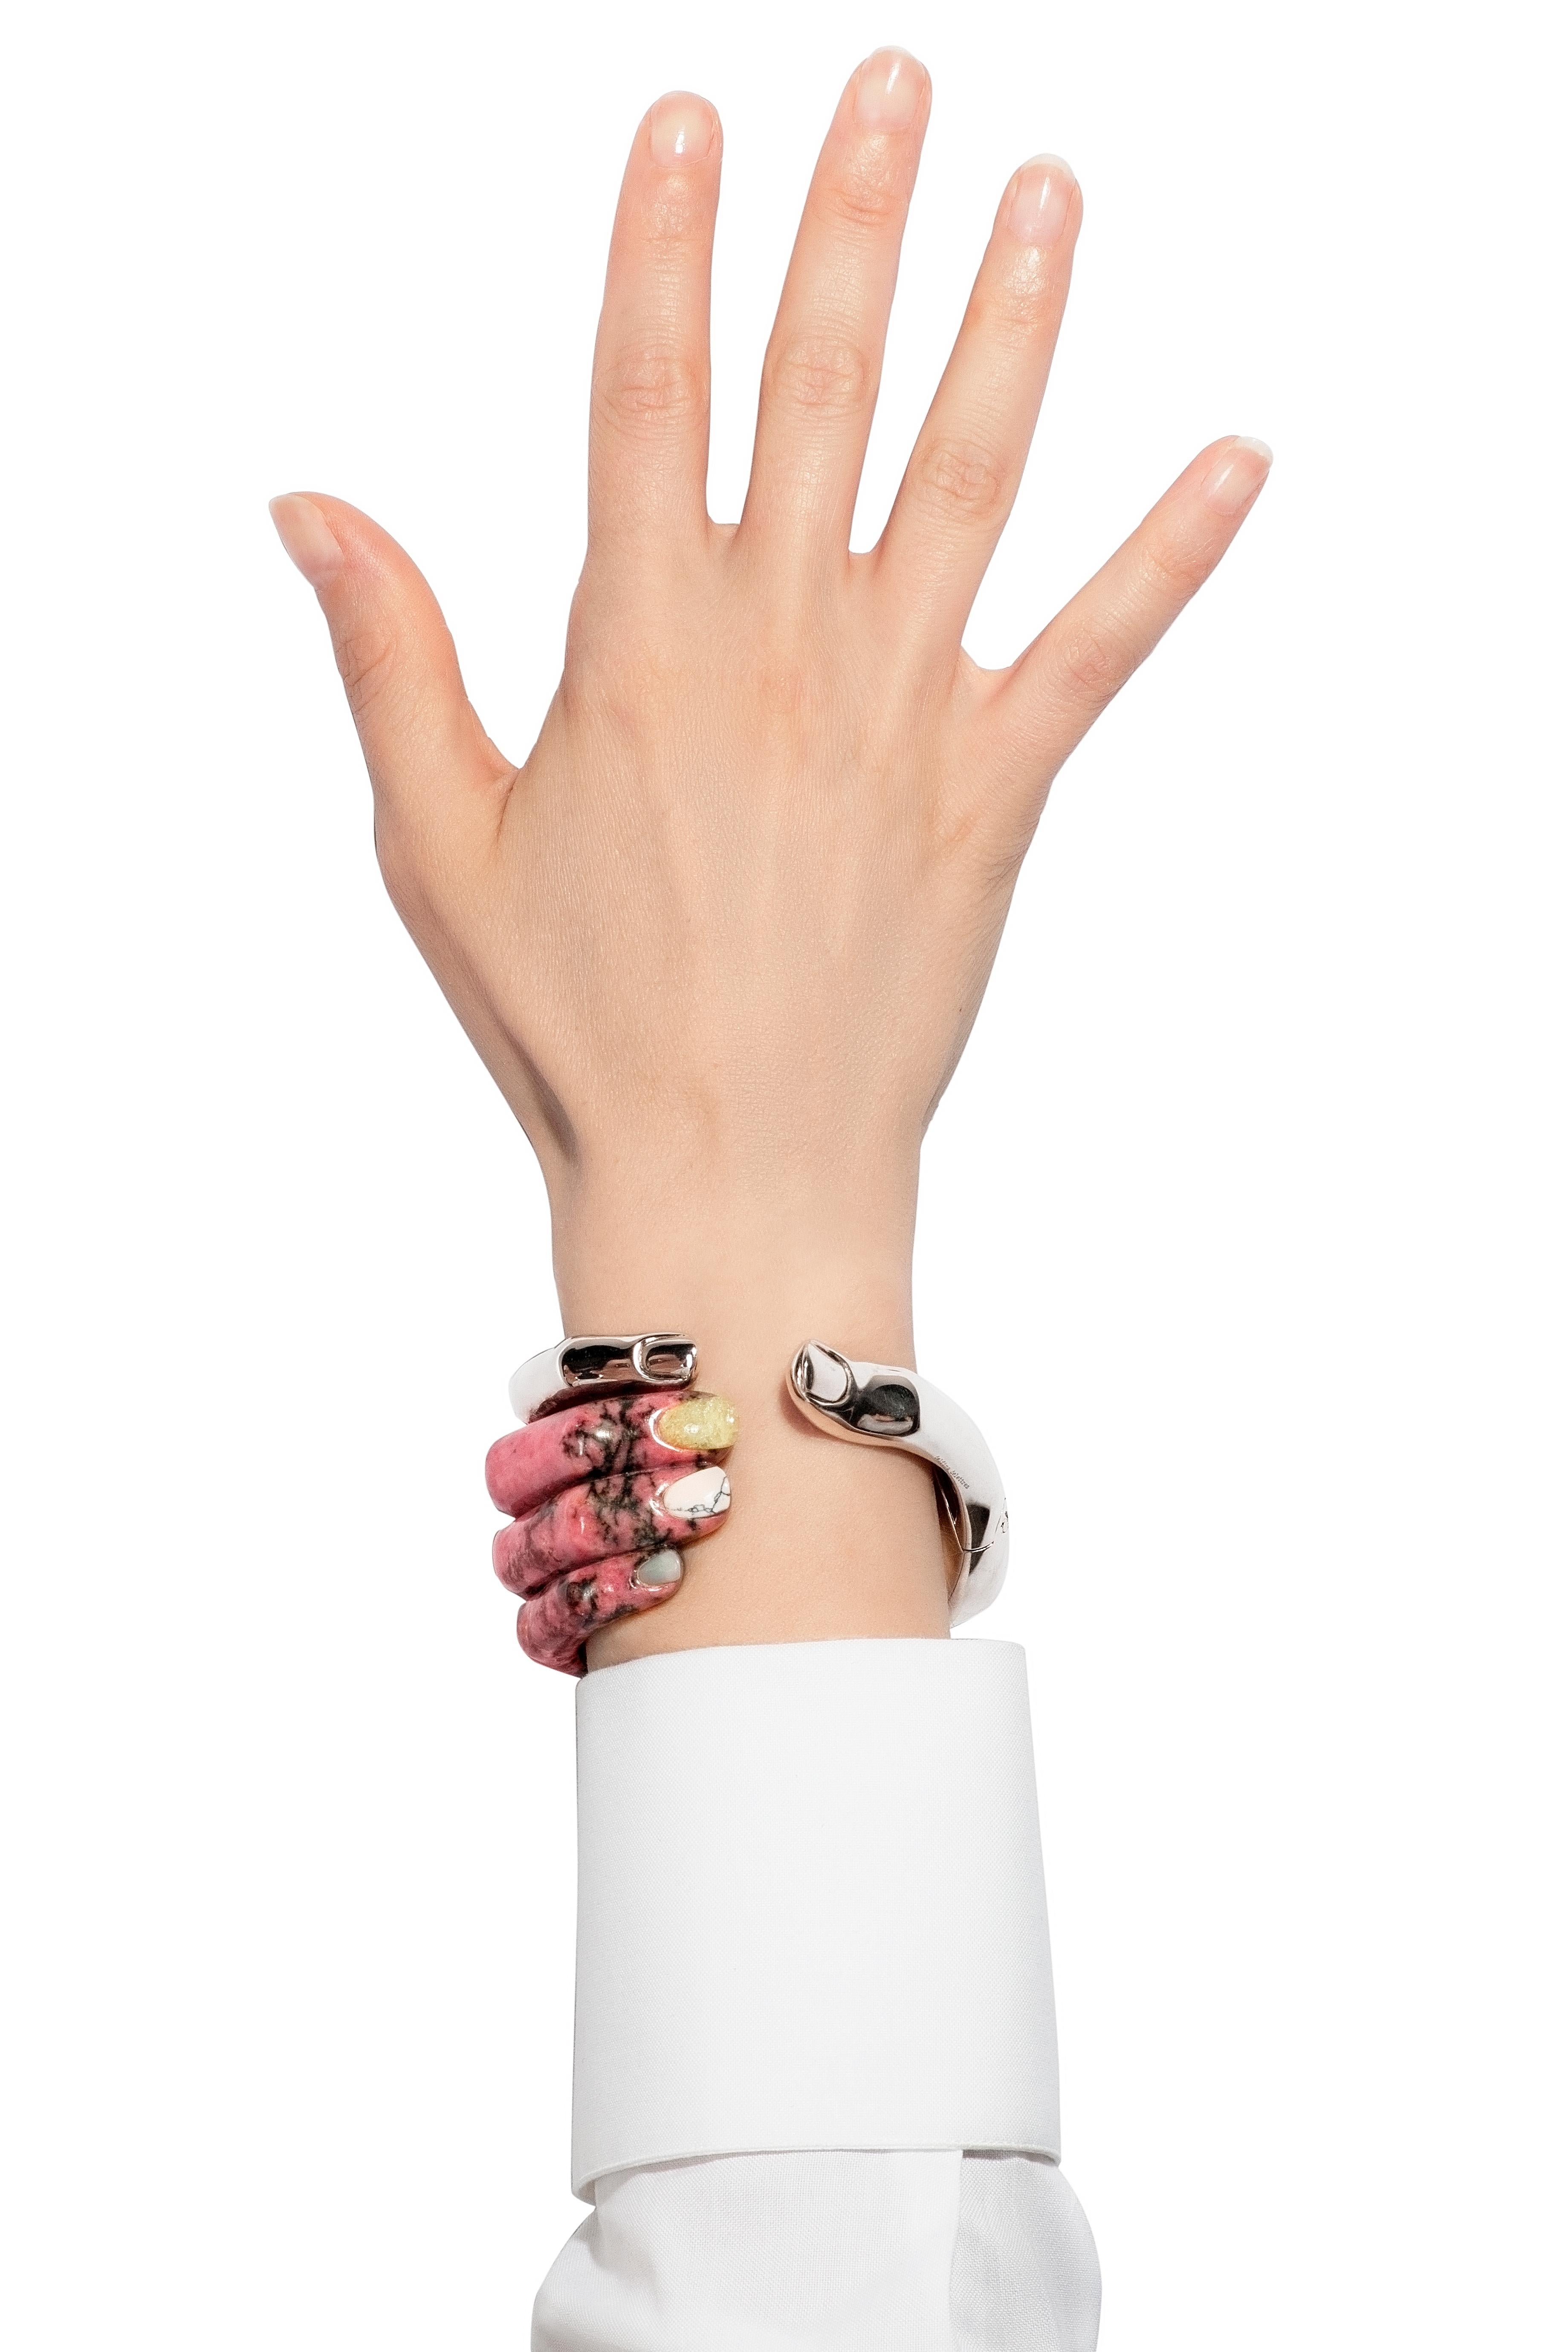 A unique, statement cuff bracelet created by Italian jeweller Delfina Delettrez. The Stonehand Bracelet is a playful study of the human anatomy and the designers fascination with adorning the body parts in a nod to the surrealist movement and